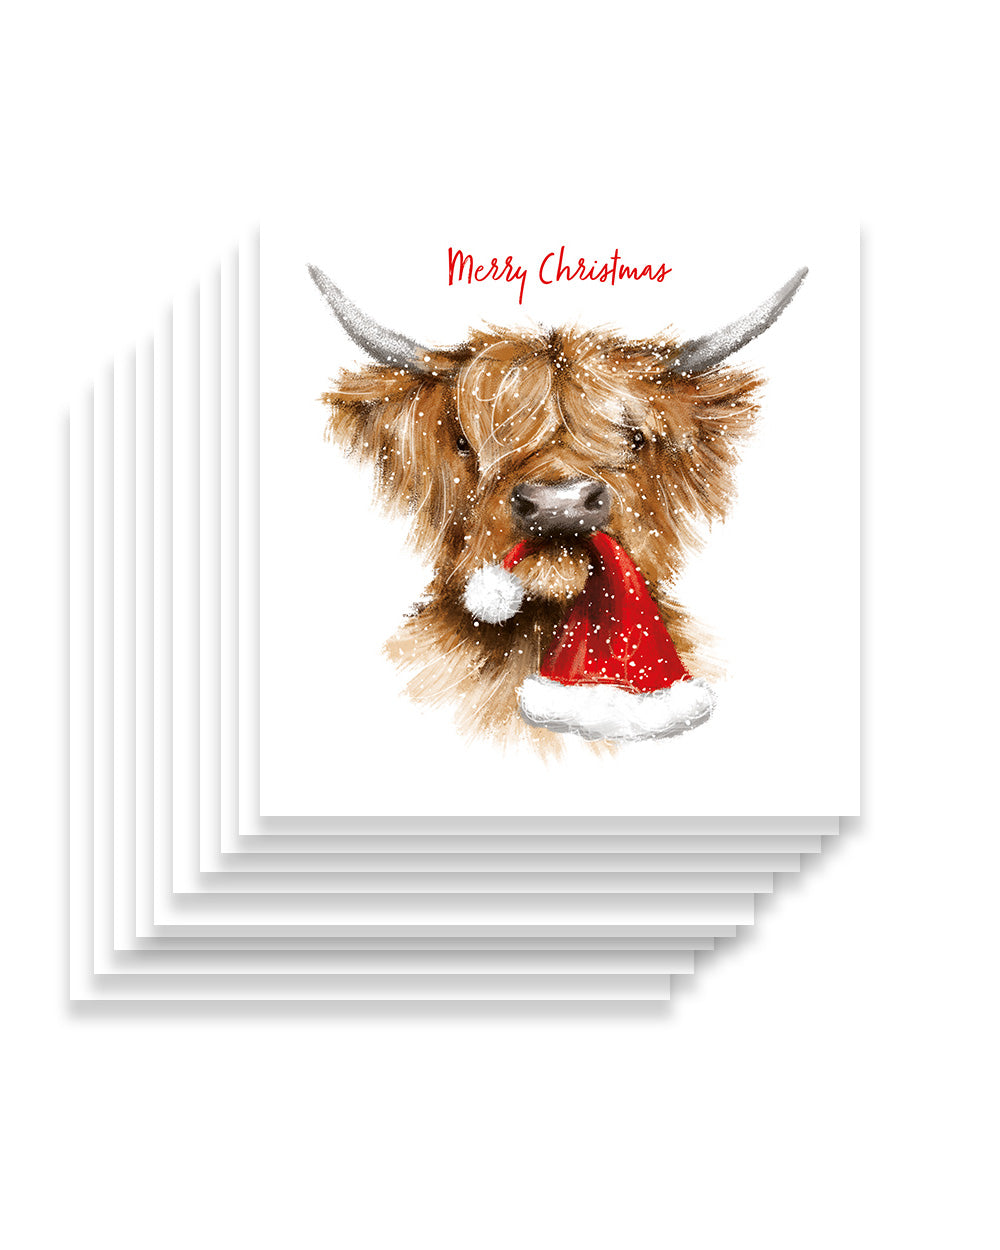 Crafted from FSC certified paper and card and made using environmentally friendly vegetable ink. Making them 100% recyclable.  Each card presents a heartwarming and modern scene: a Highland cow playfully holding a Christmas hat in its mouth, exuding both charm and holiday cheer. The front is adorned with the timeless message "Merry Christmas" in festive red, conveying warm wishes to your loved one